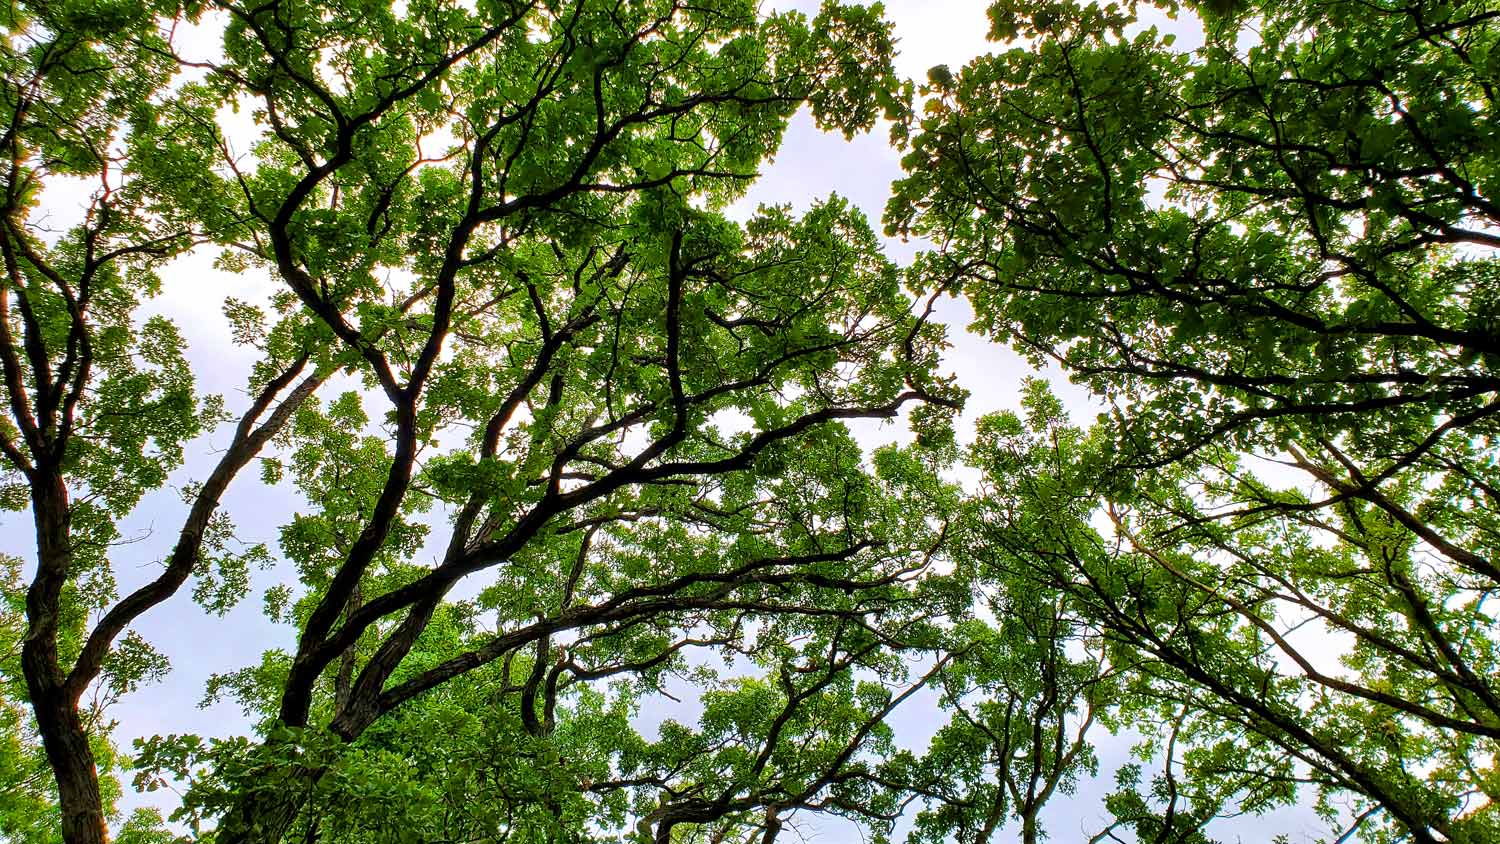 Majestic oak canopy of the natural amphitheater at the Pleasant Valley Conservation Area.